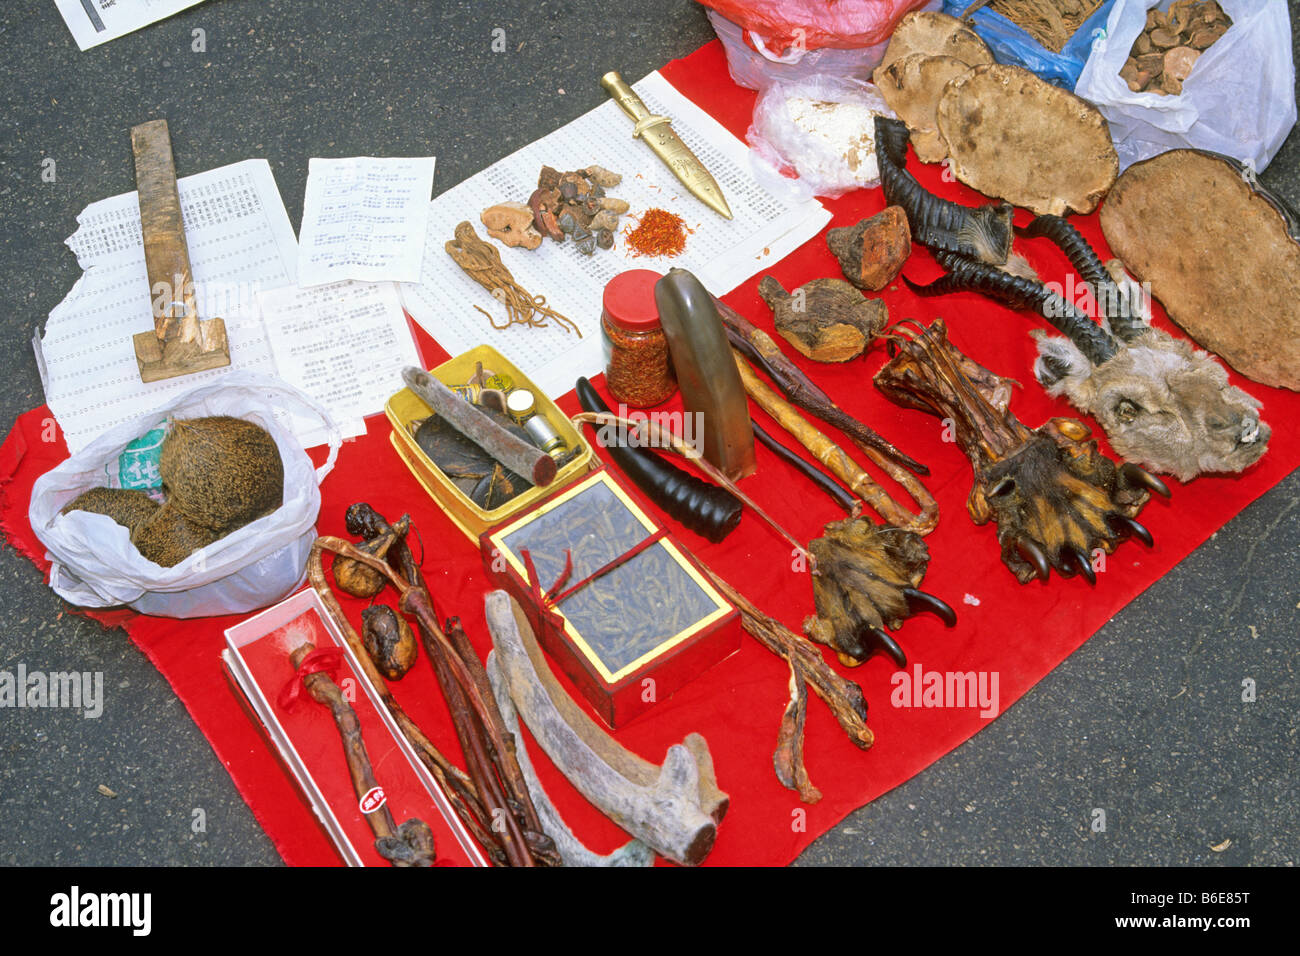 Ingredients for chinese medicines using tiger bones penisses claws et al Stock Photo